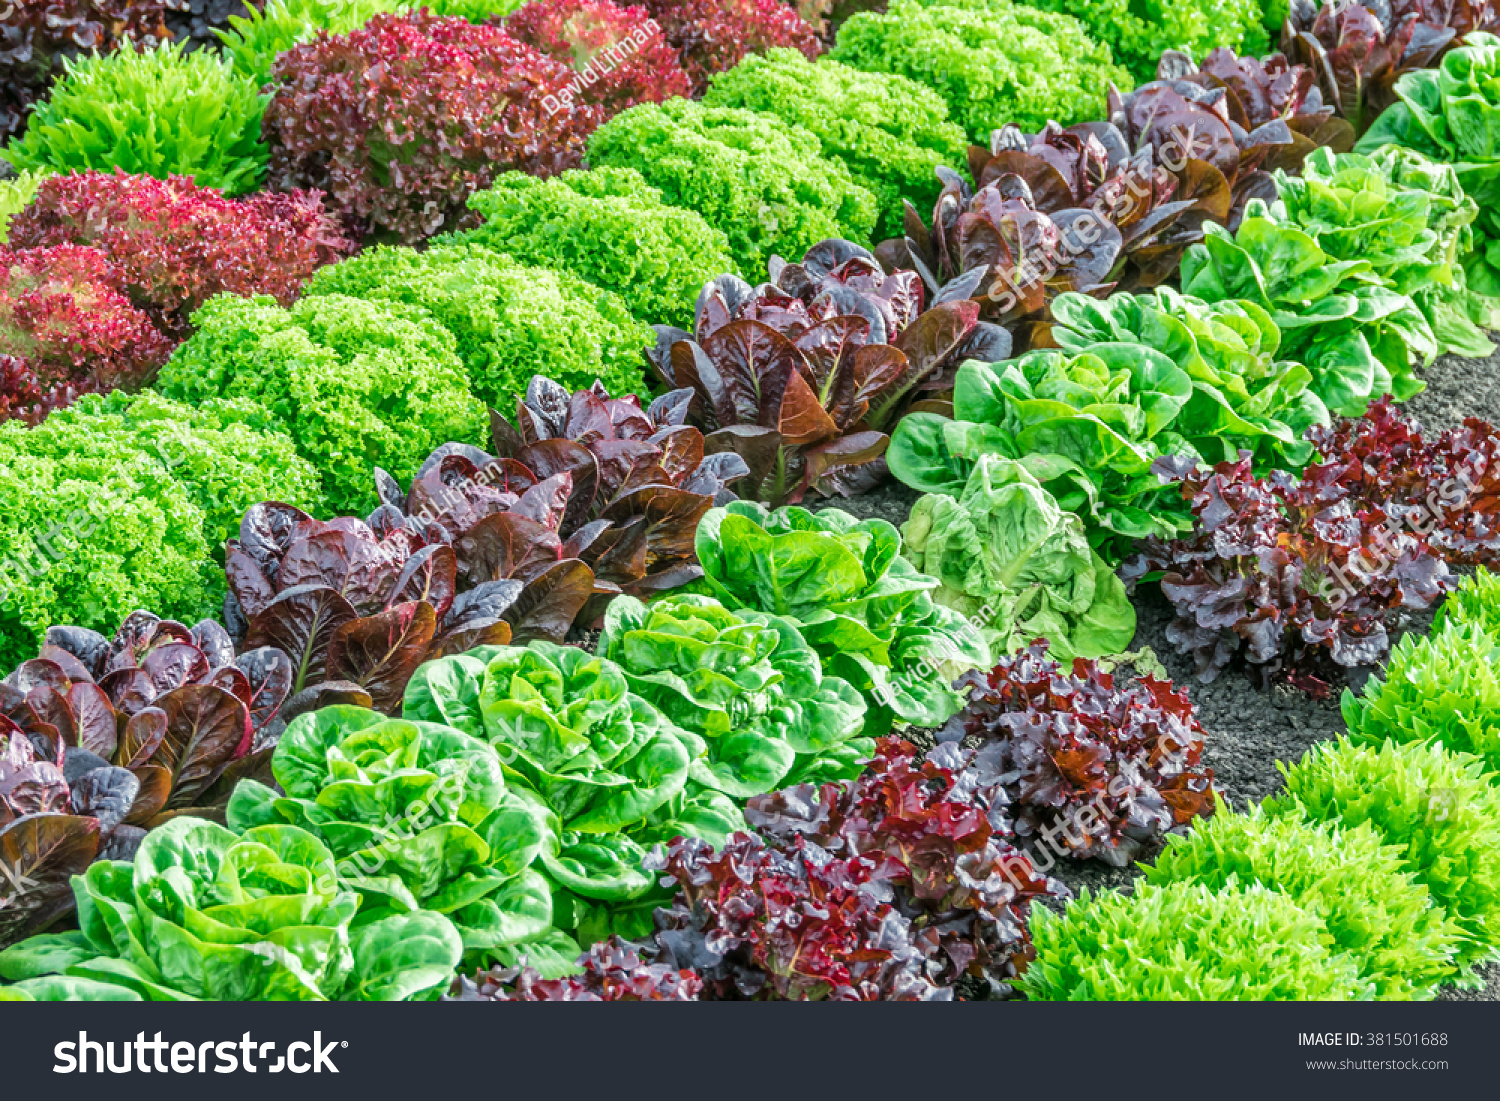 Lettuce harvest: a rainbow of colorful (colourful) fields of summer crops (lettuce plants), including mixed green, red, purple varieties, grow in rows in Salinas Valley of Central California. #381501688